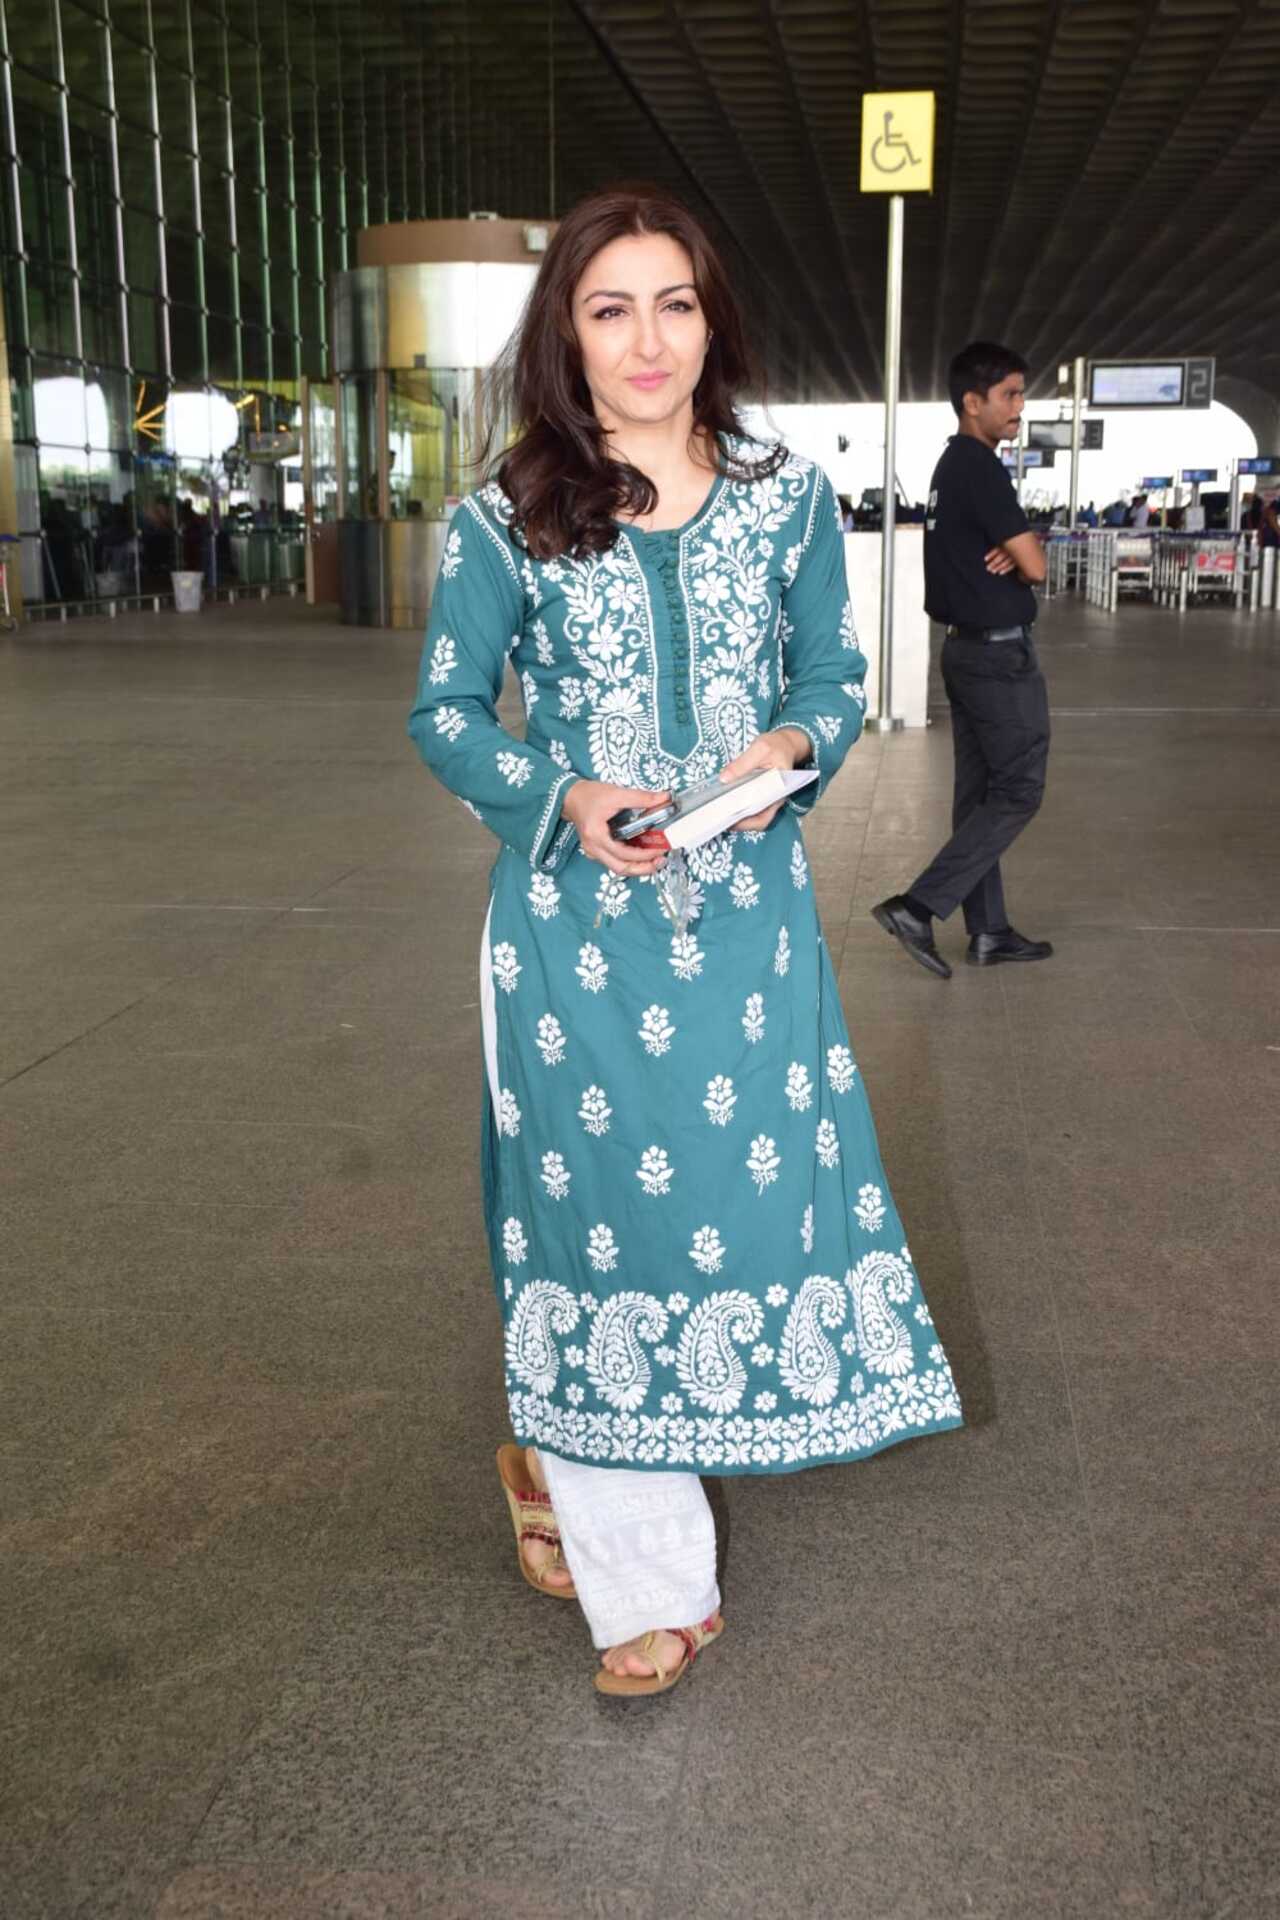 Soha Ali Khan was spotted in bright blue kurta at the airport